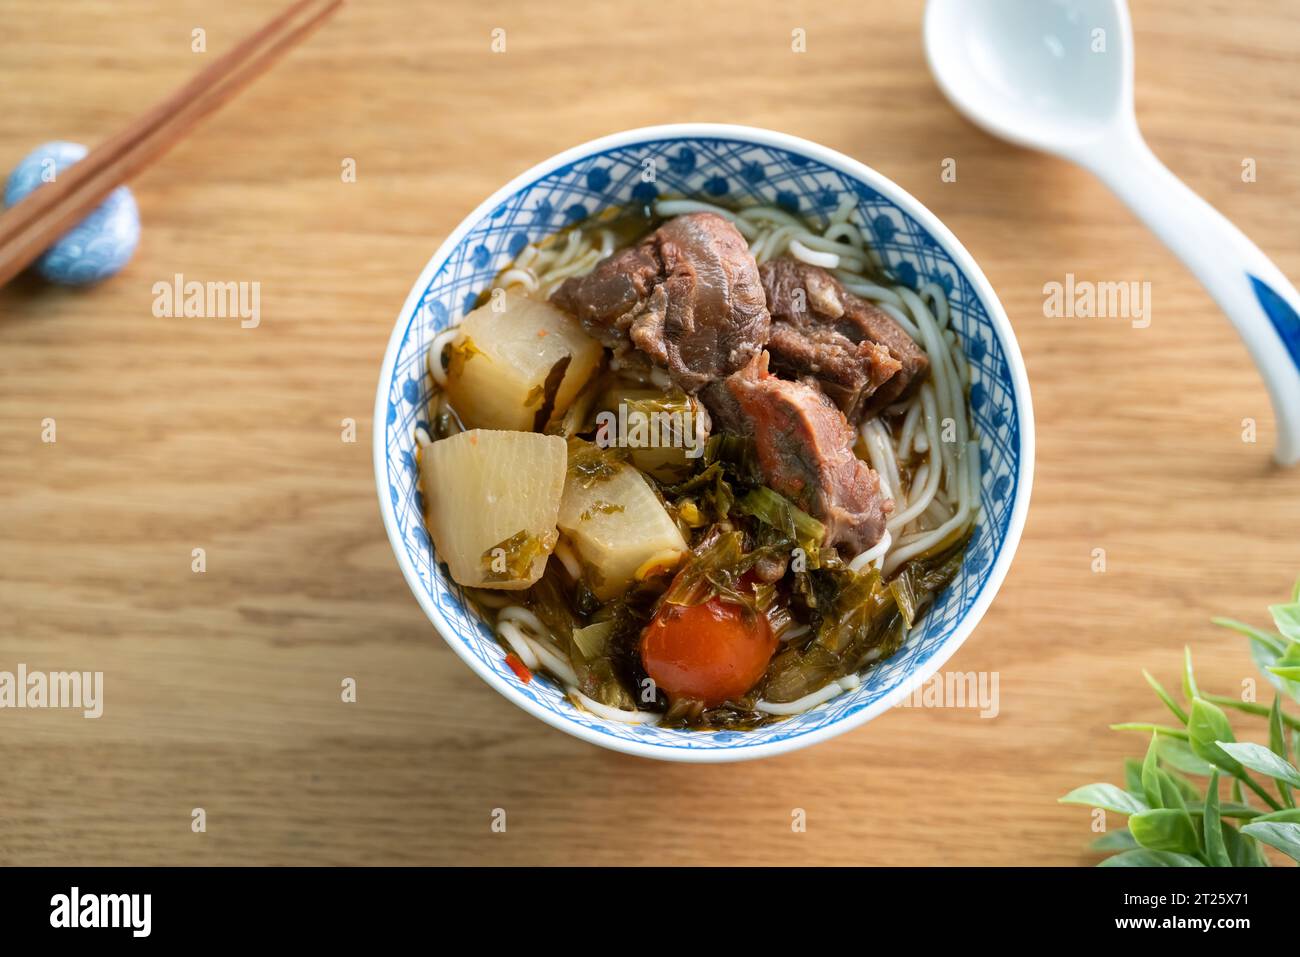 Beef noodle soup. Taiwanese famous food with sliced red braised beef and vegetables in a bowl on wooden table background. Stock Photo